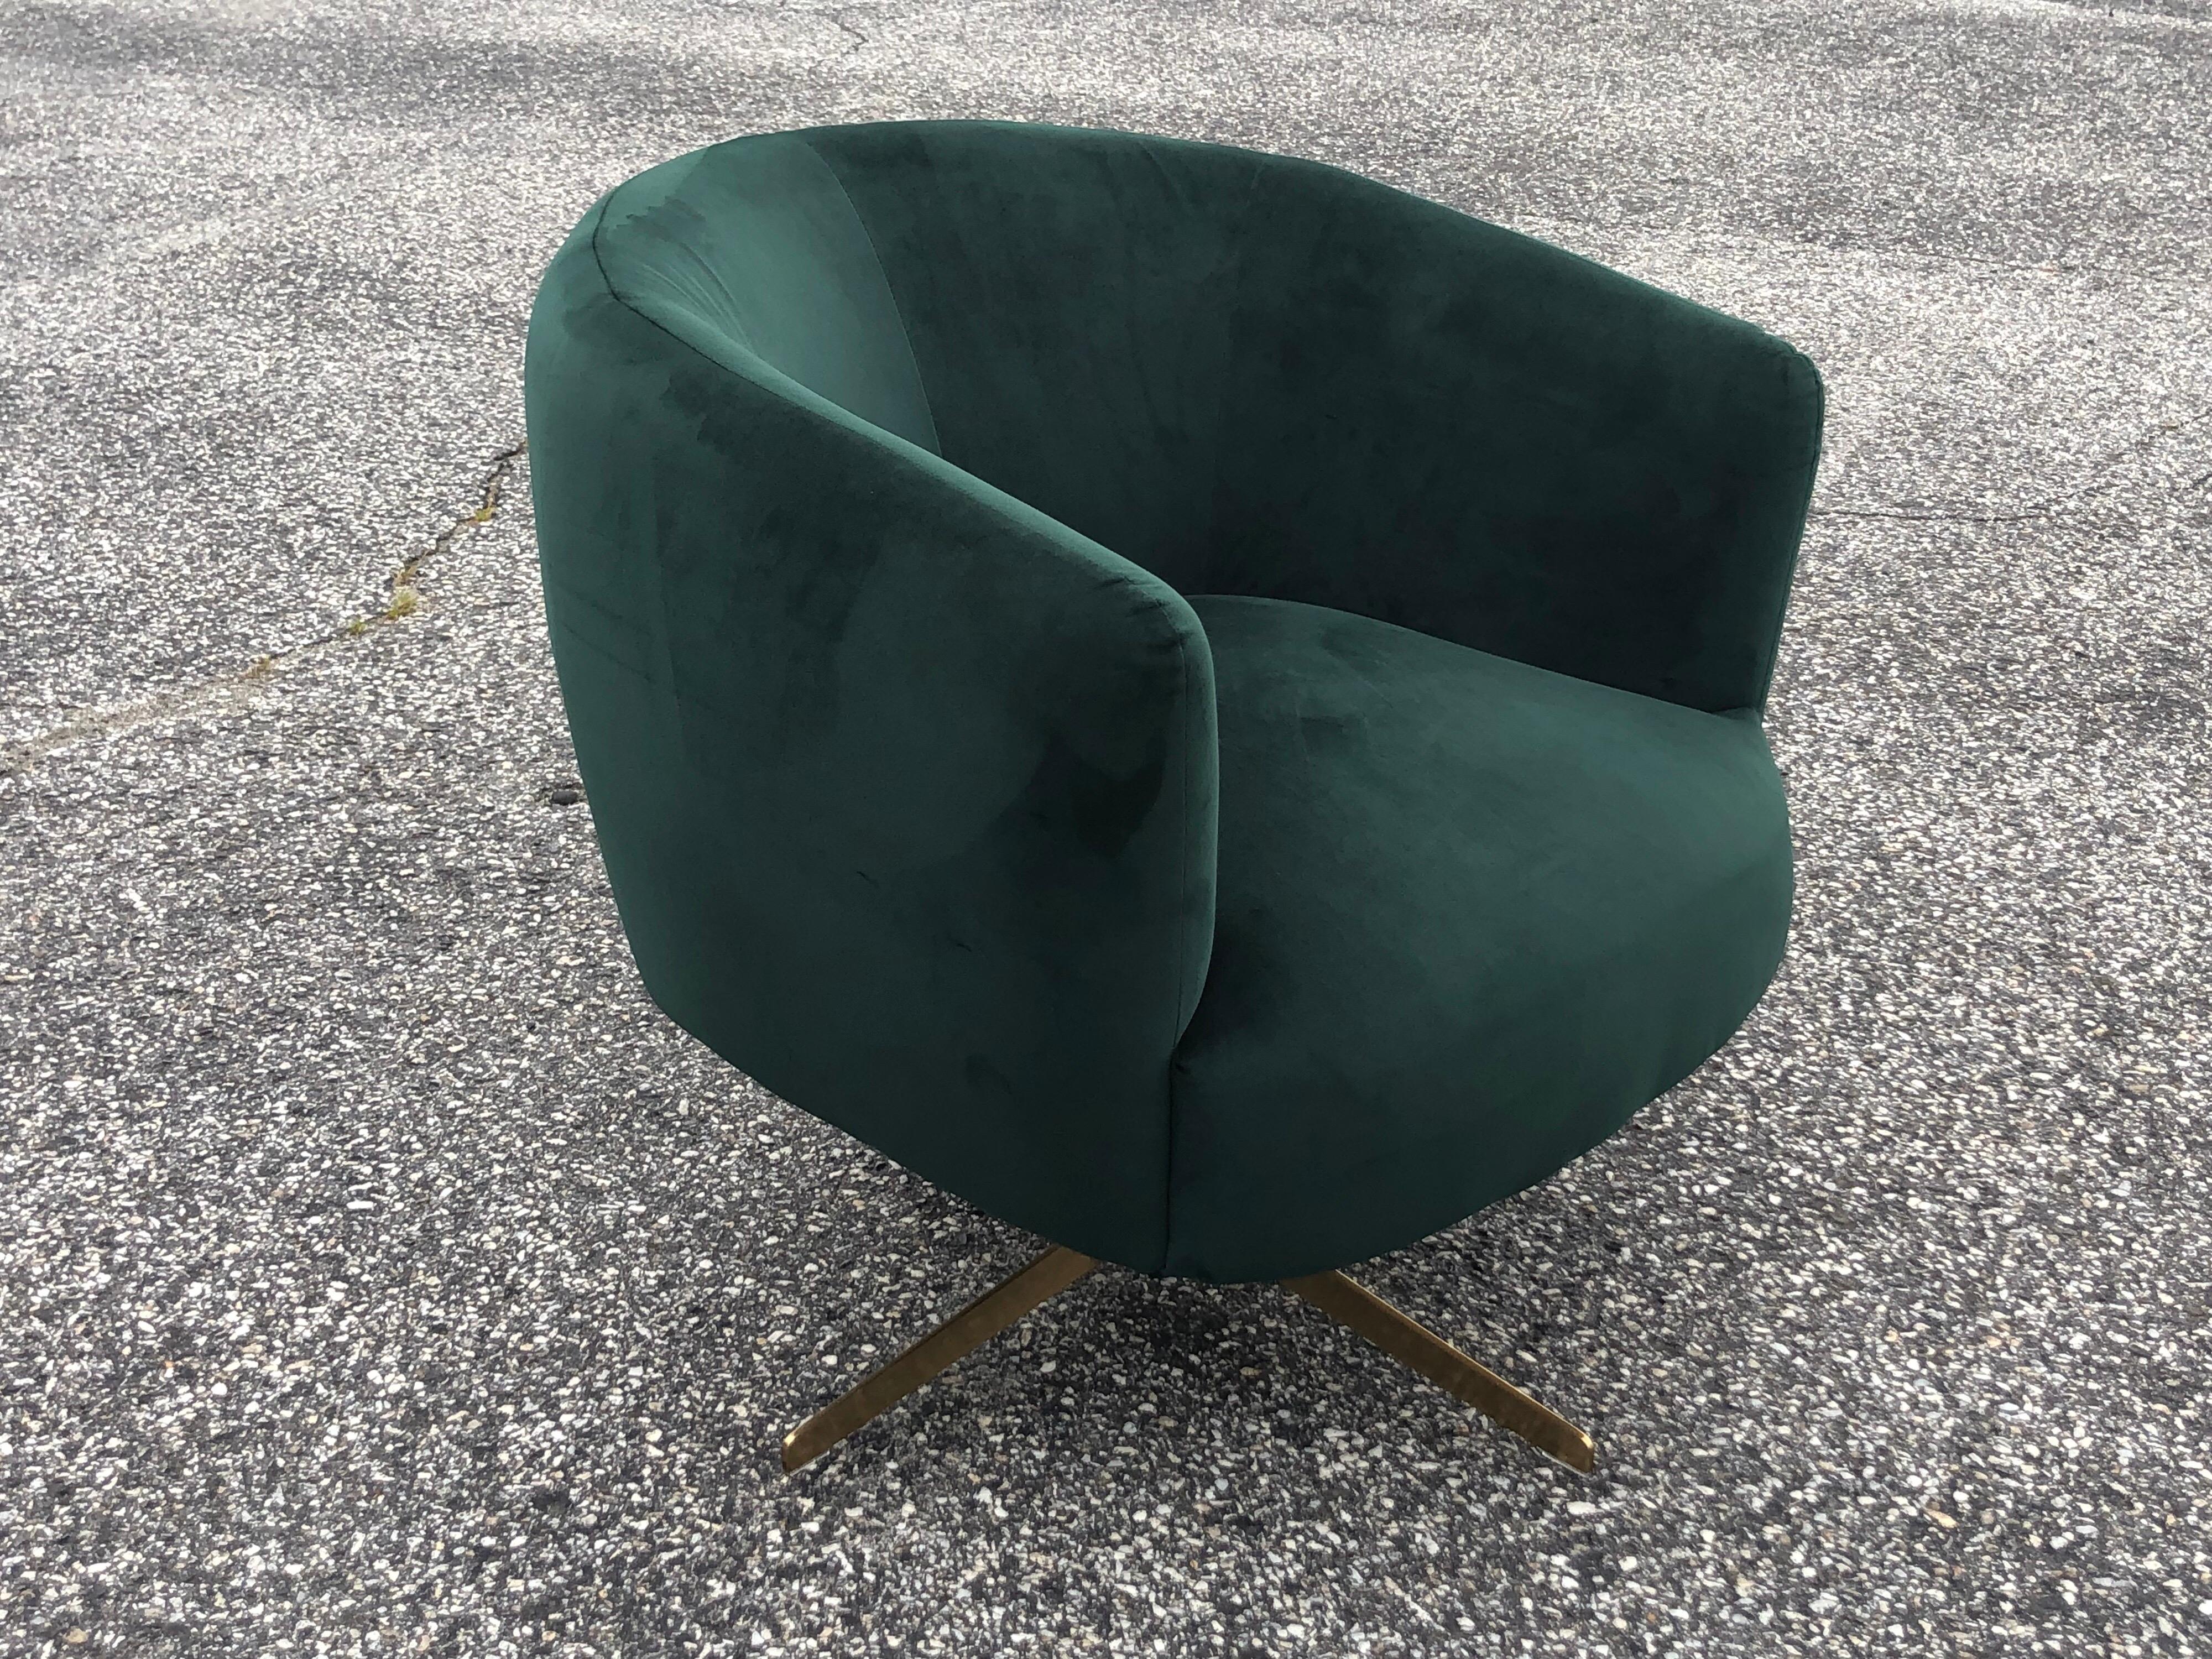 Emerald green velvet swivel club chair. Four star brass pedestal base. This luxurious chair swivels and is solidly made yet plush to sit in.
Measures: Overall height 30 inches
Overall width 30.5 inches
Overall depth 30.75 inches
Seat height 19